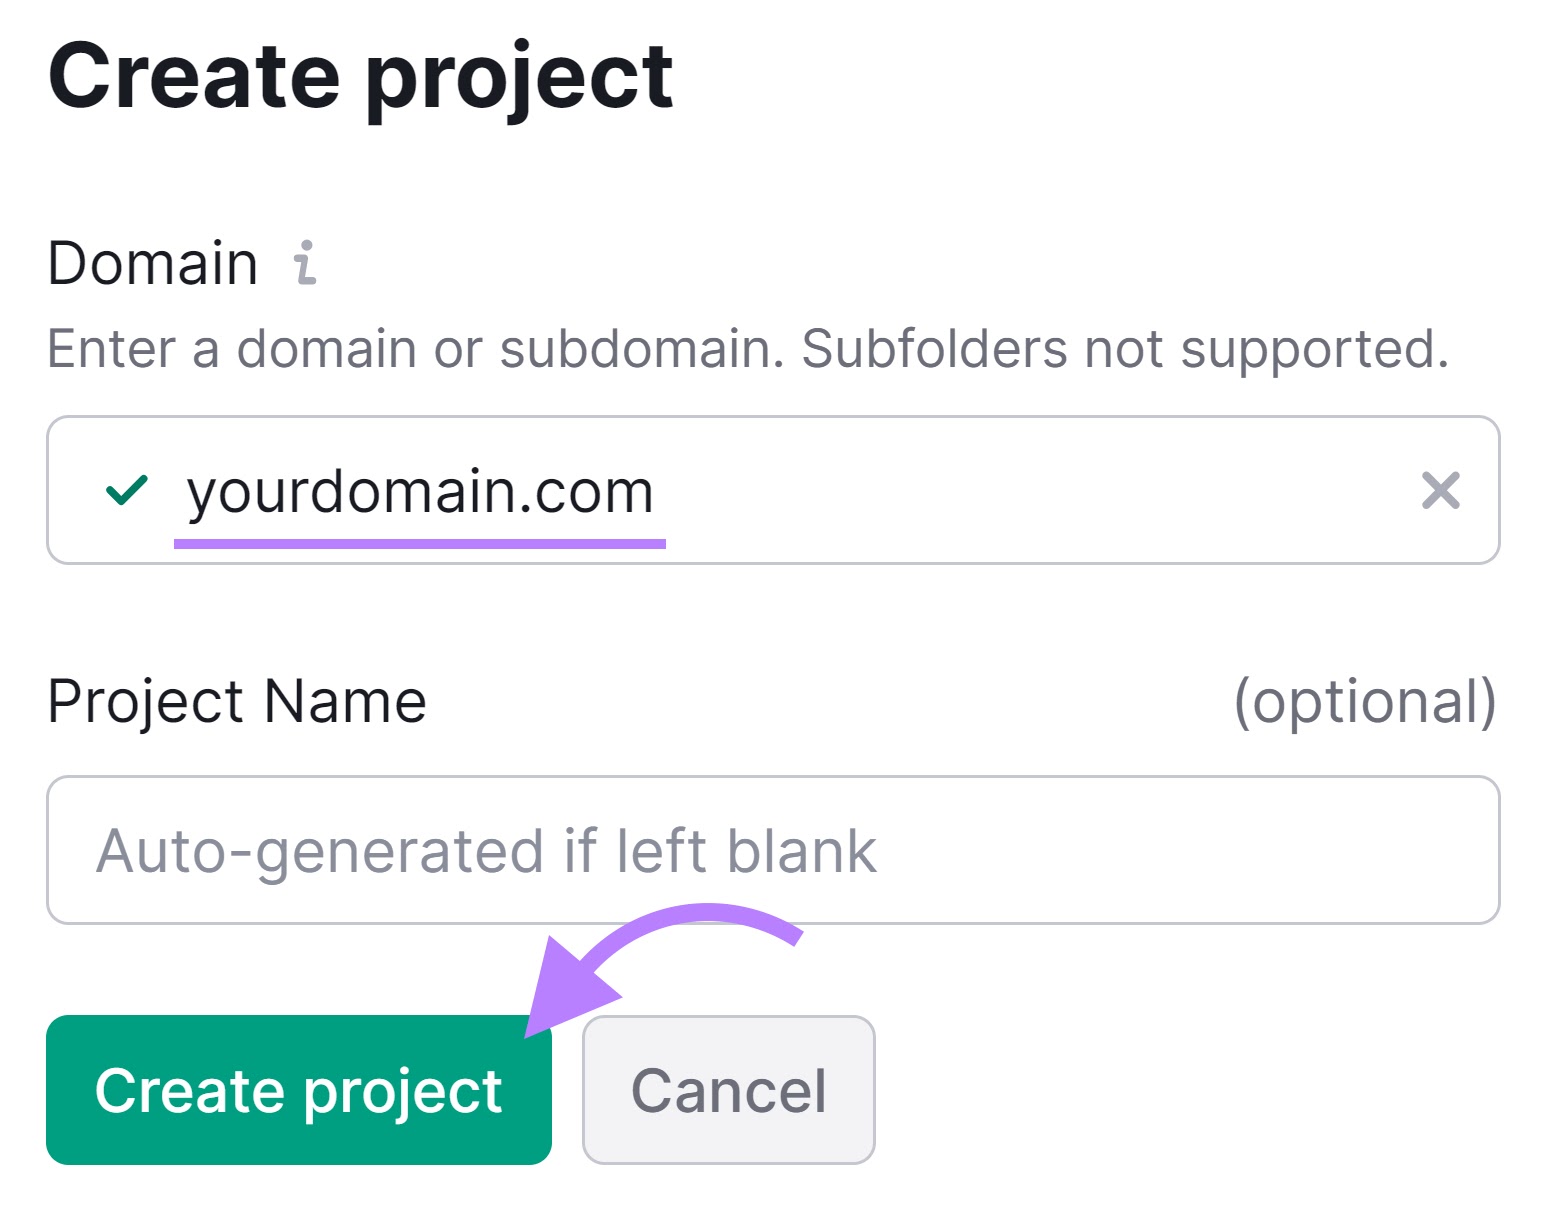 Site Audit tool "Create project" window with the domain name and "Create project" button highlighted.